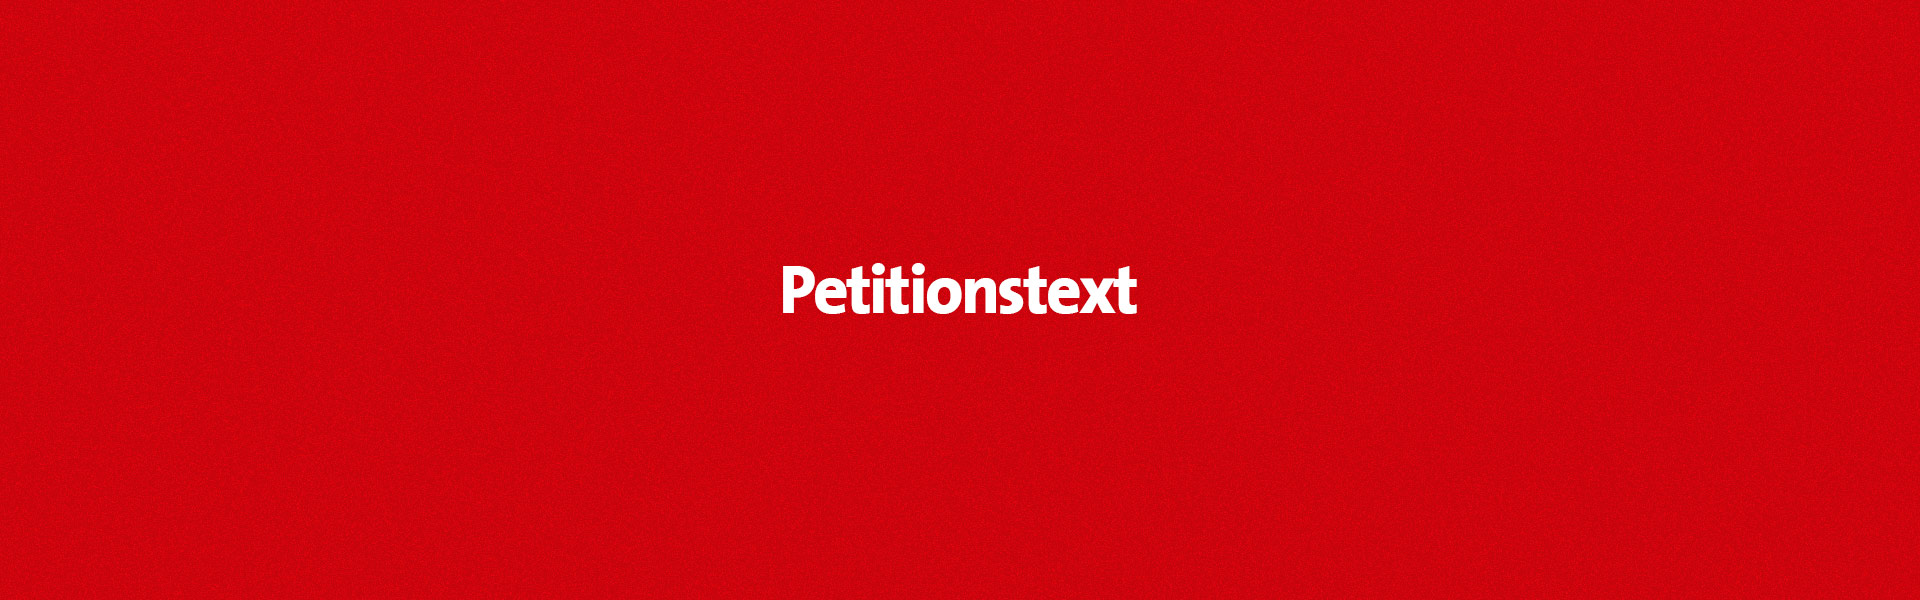 Petitionstext